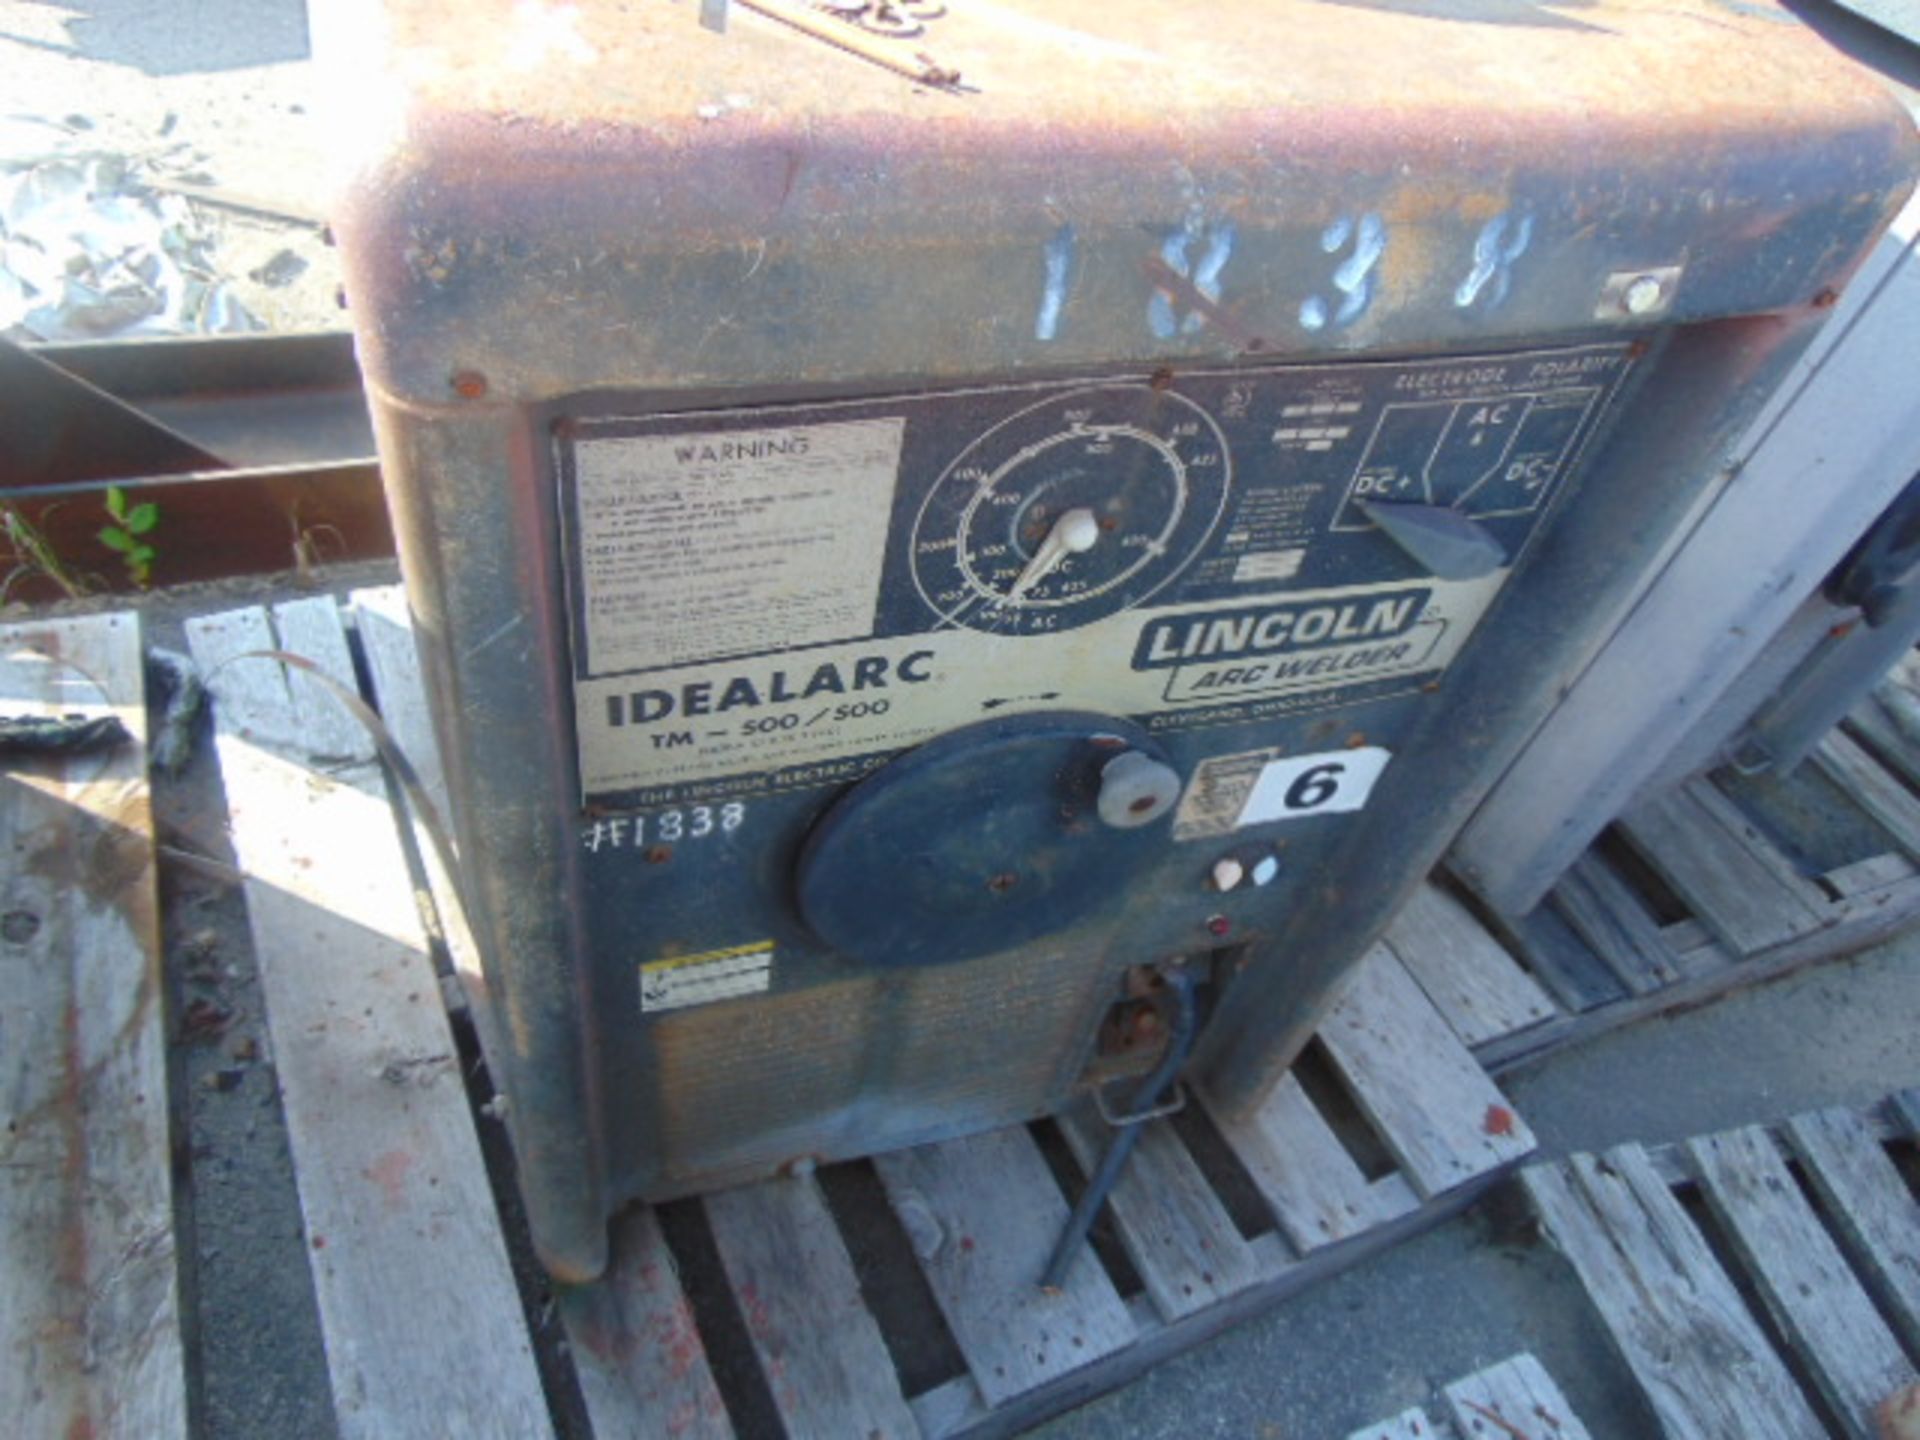 LOT OF ARC WELDERS (9), LINCOLN IDEALARC TM-500/500 - Image 6 of 10